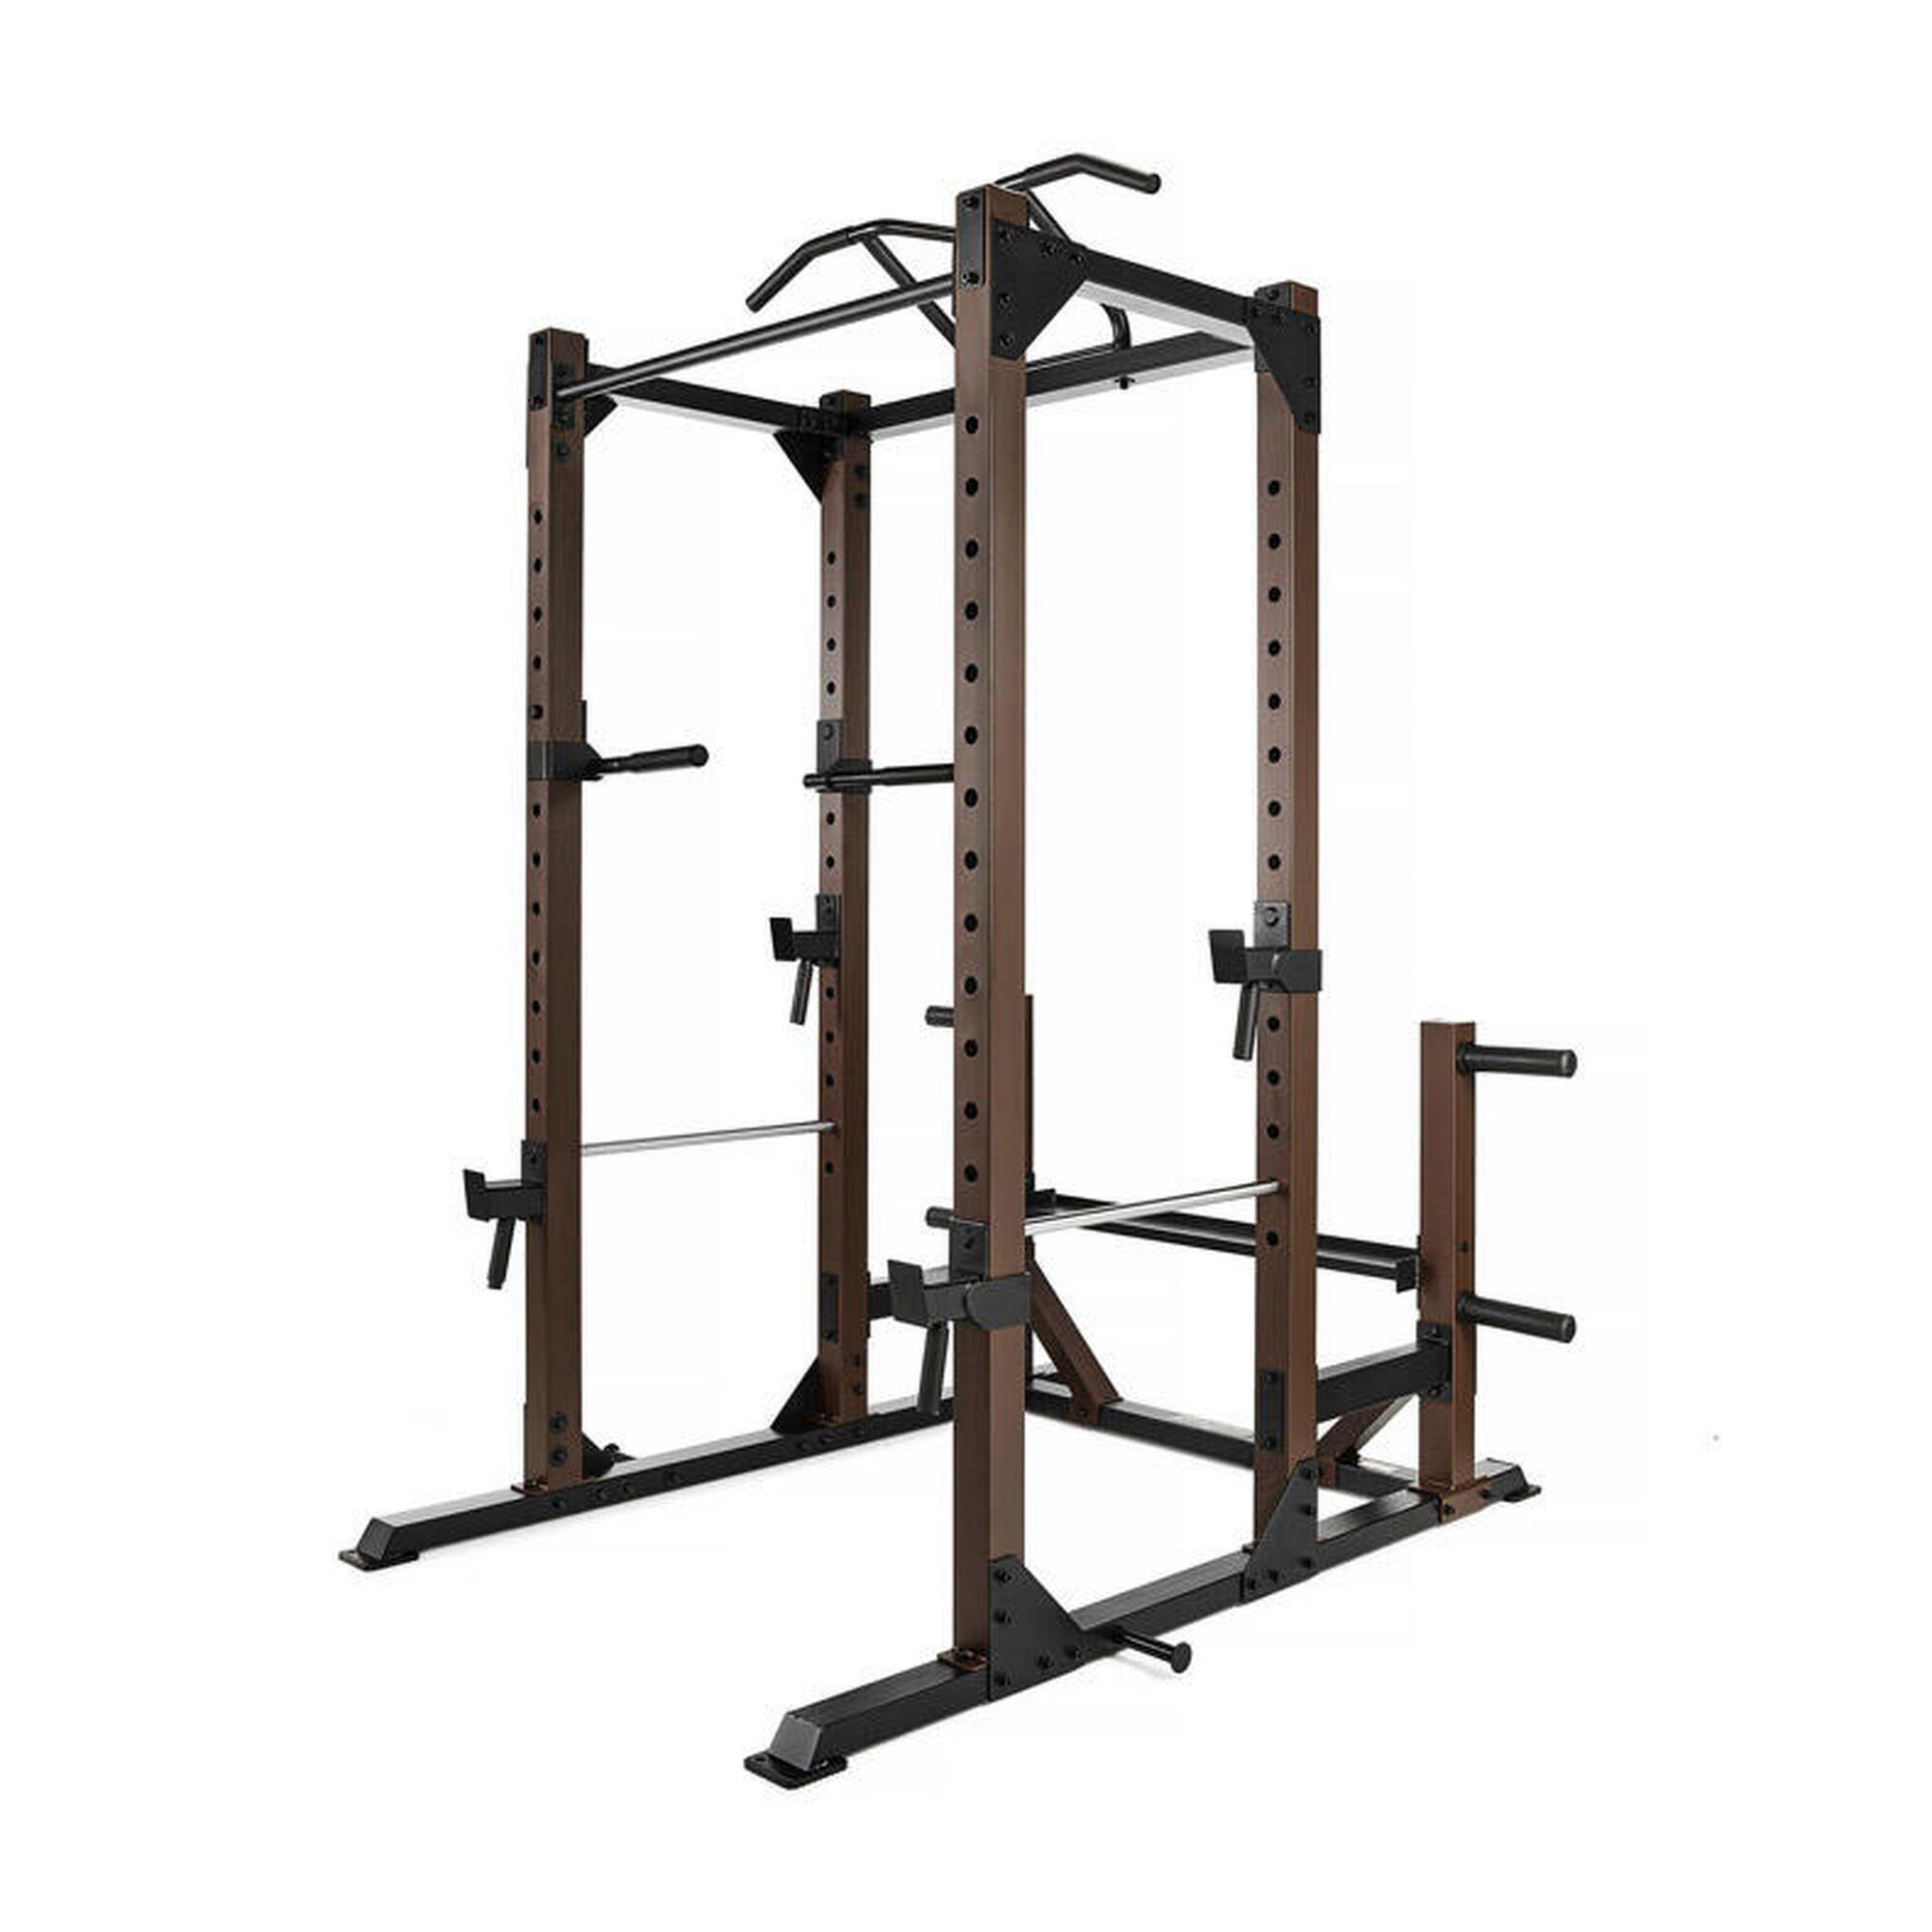 MARCY STEELBODY STB-98005 LIGHT COMMERCIAL MONSTER POWER CAGE & SQUAT RACK